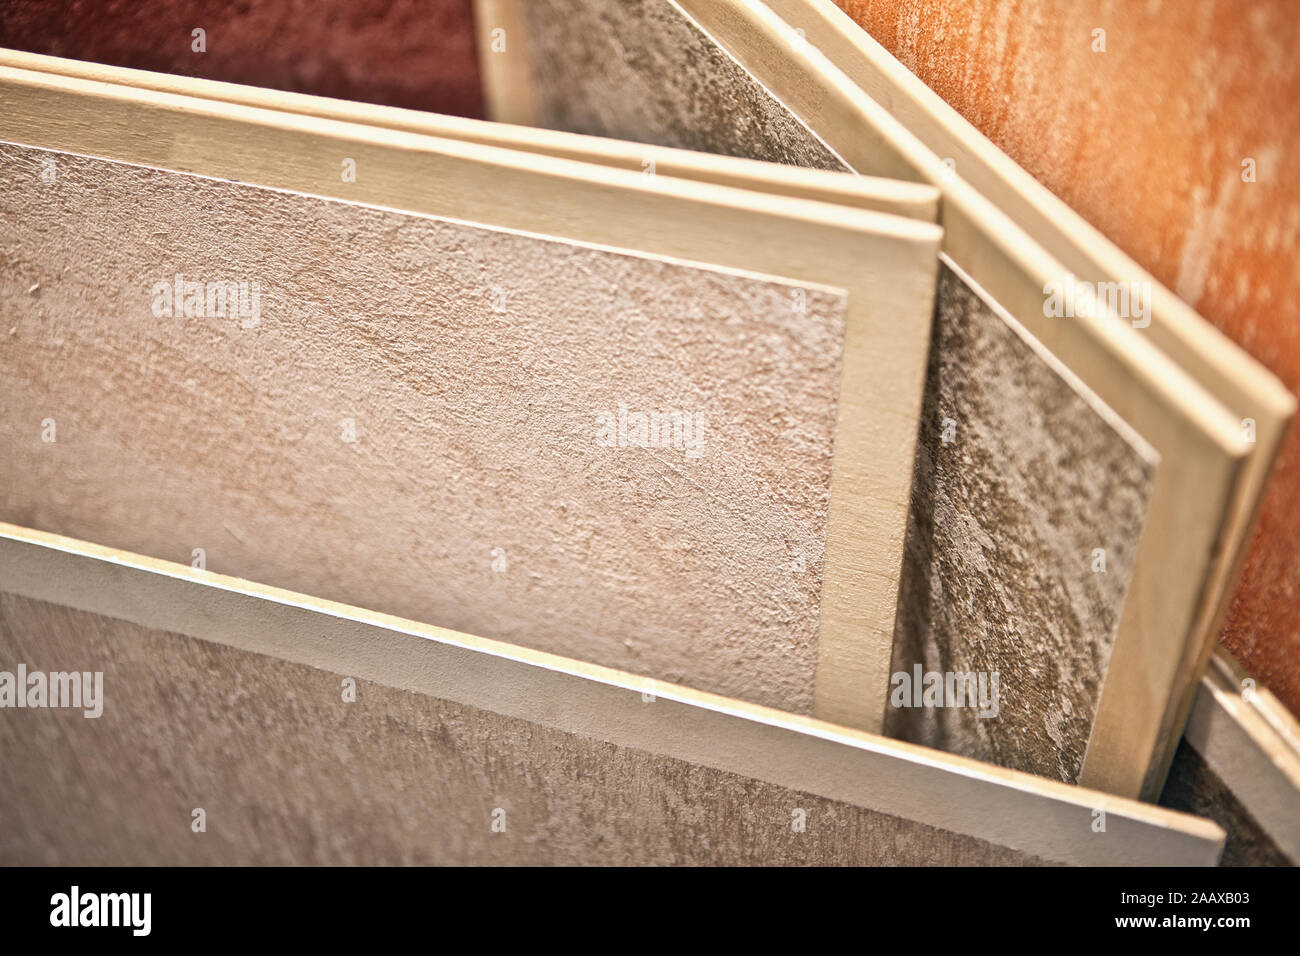 Close up wood texture floor samples of laminate and vinyl floor tile in a store Stock Photo